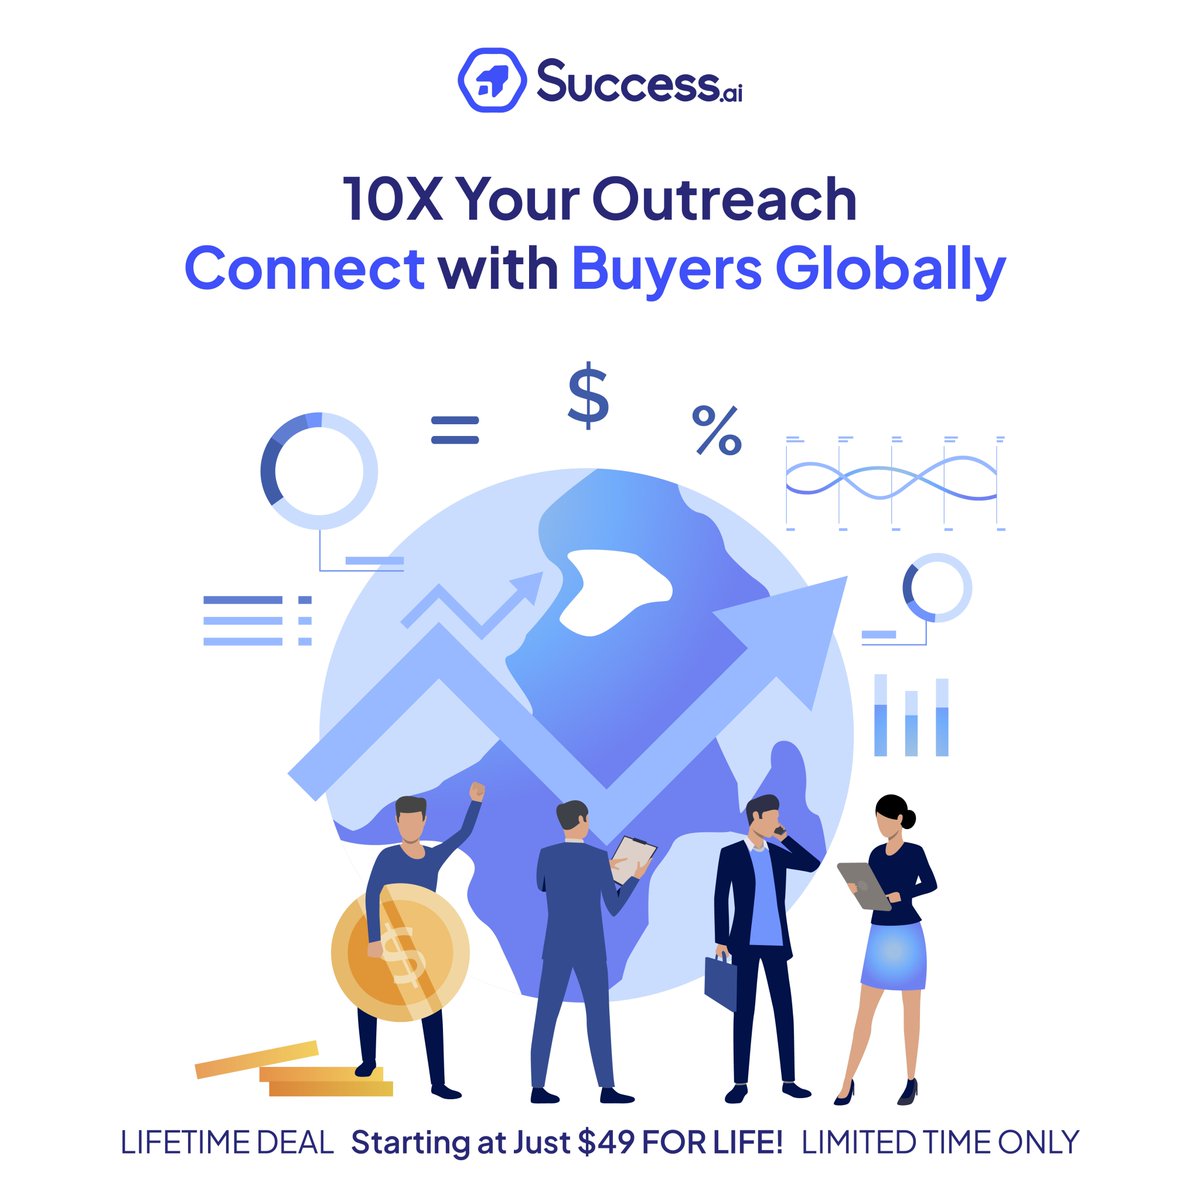 10X Your Outreach: Connect with Buyers Globally 

With Success.ai say goodbye to missed opportunities and hello to boundless connections
appsumo.com/products/succe… 

#SuccessAI #BoundlessOutreach #GlobalBuyers #CostEffectiveCampaigns #PersonalizedEngagement